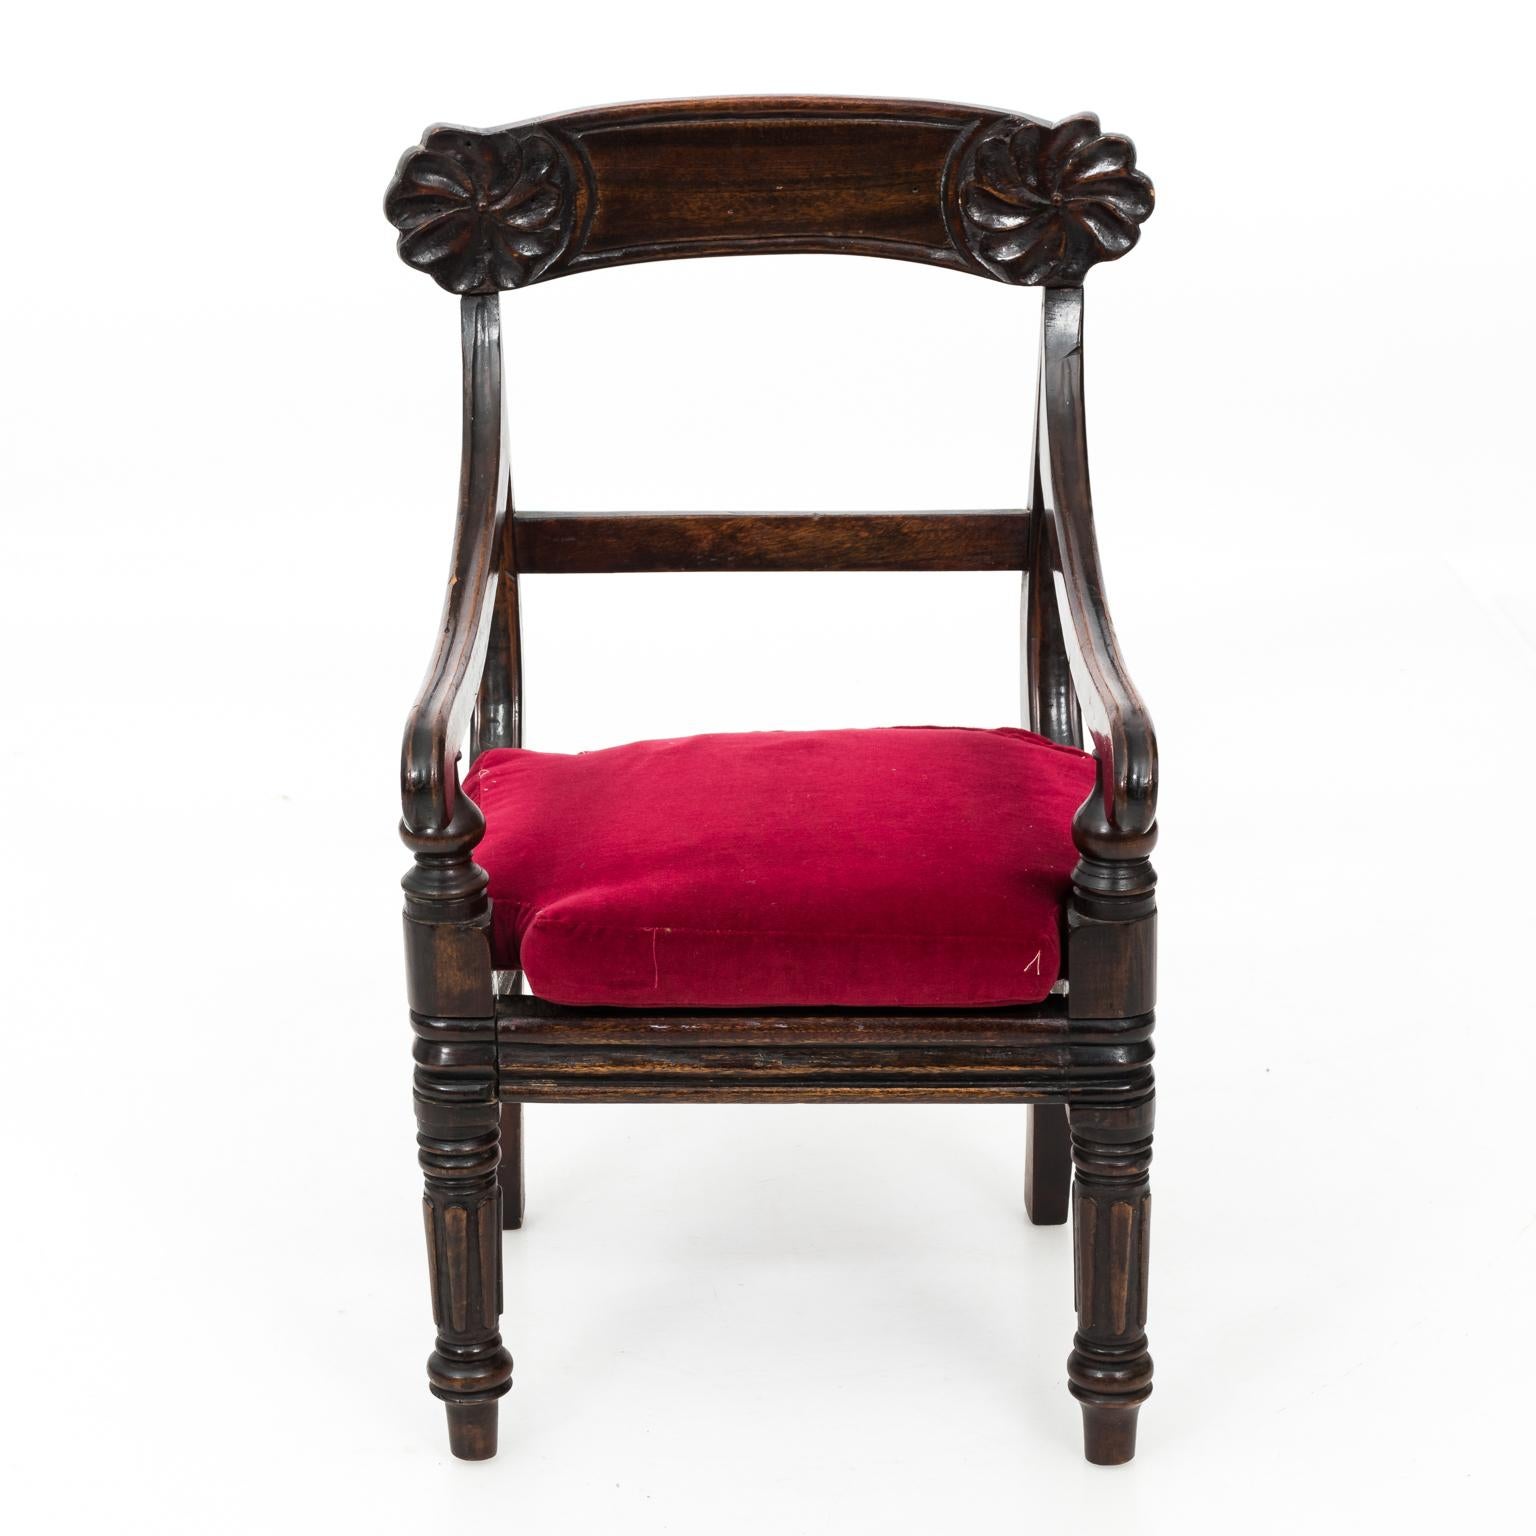 Victorian mahogany child's armchair with shallow relief floral carvings on the top rail and a red velvet upholstered seat, circa turn of the century.
  